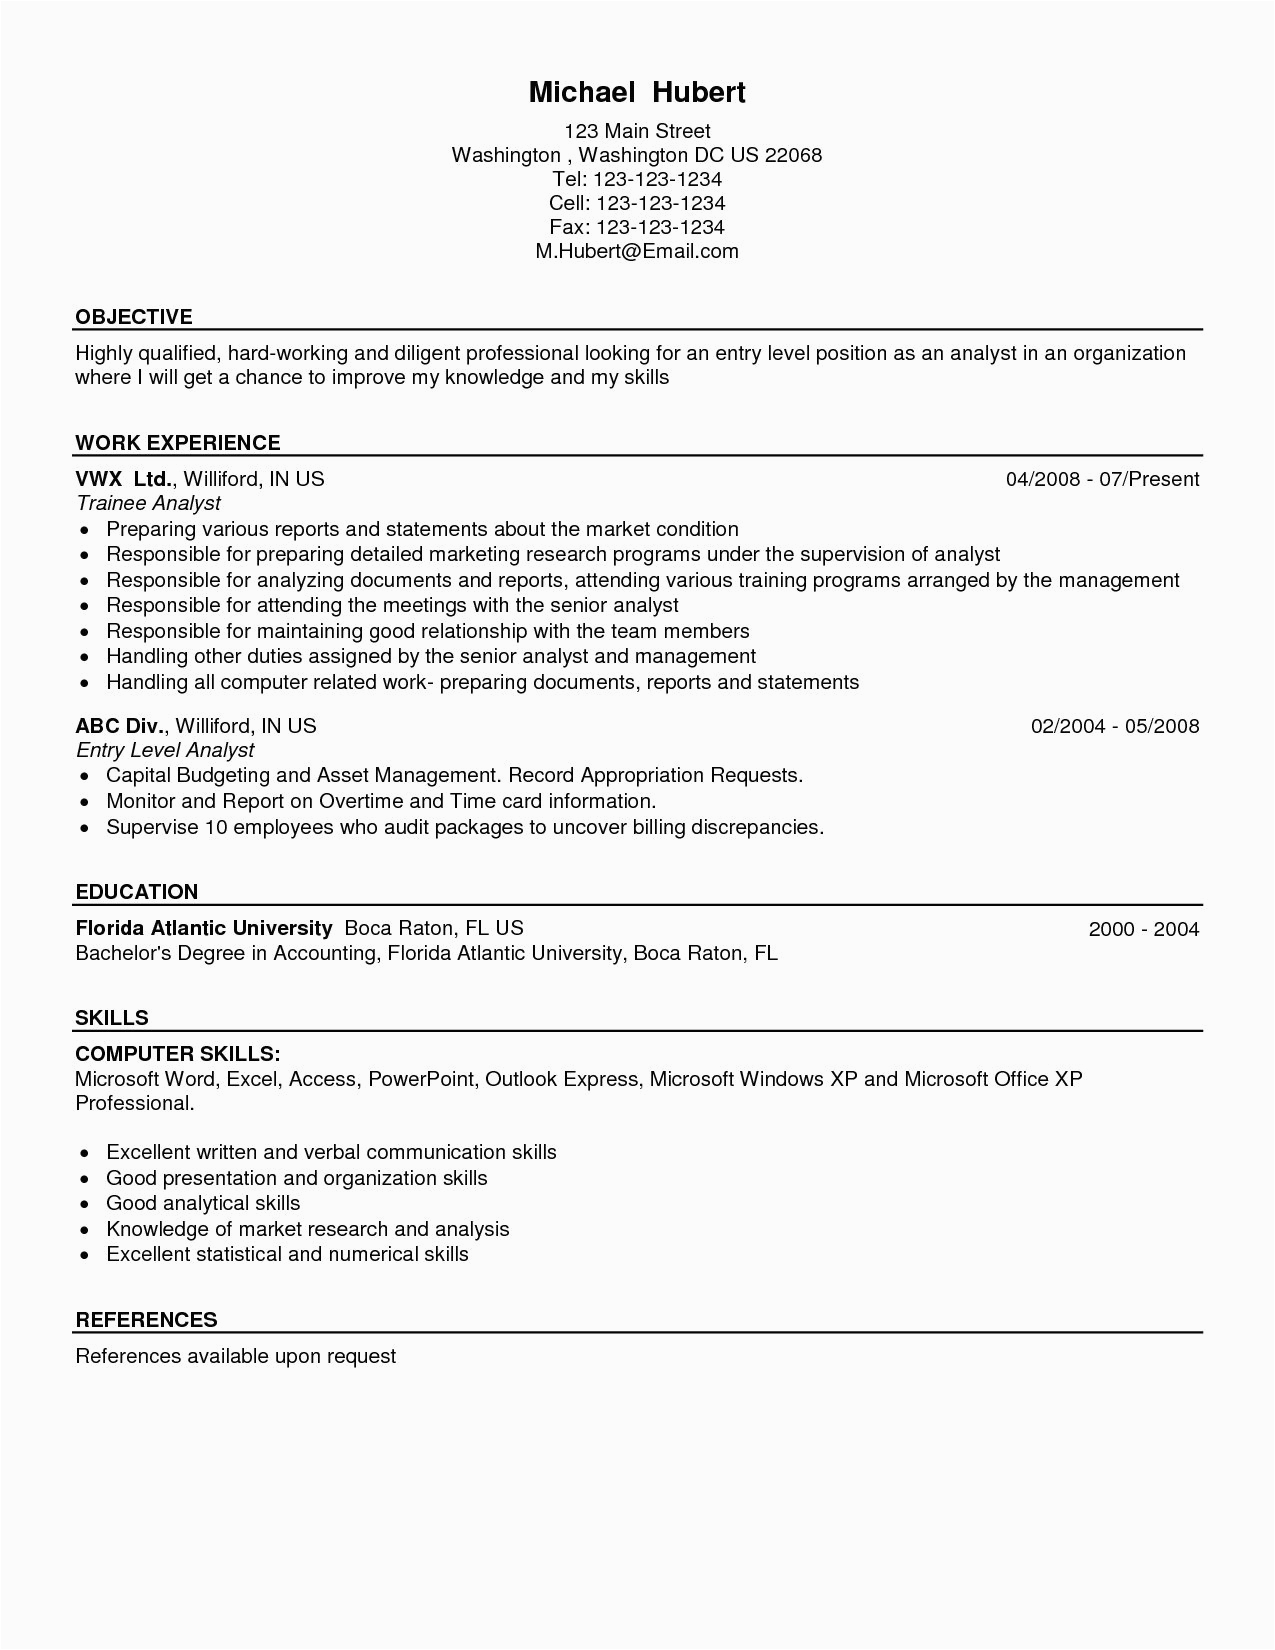 Resume Samples Financial Analyst Entry Level Entry Level Financial Analyst Resume